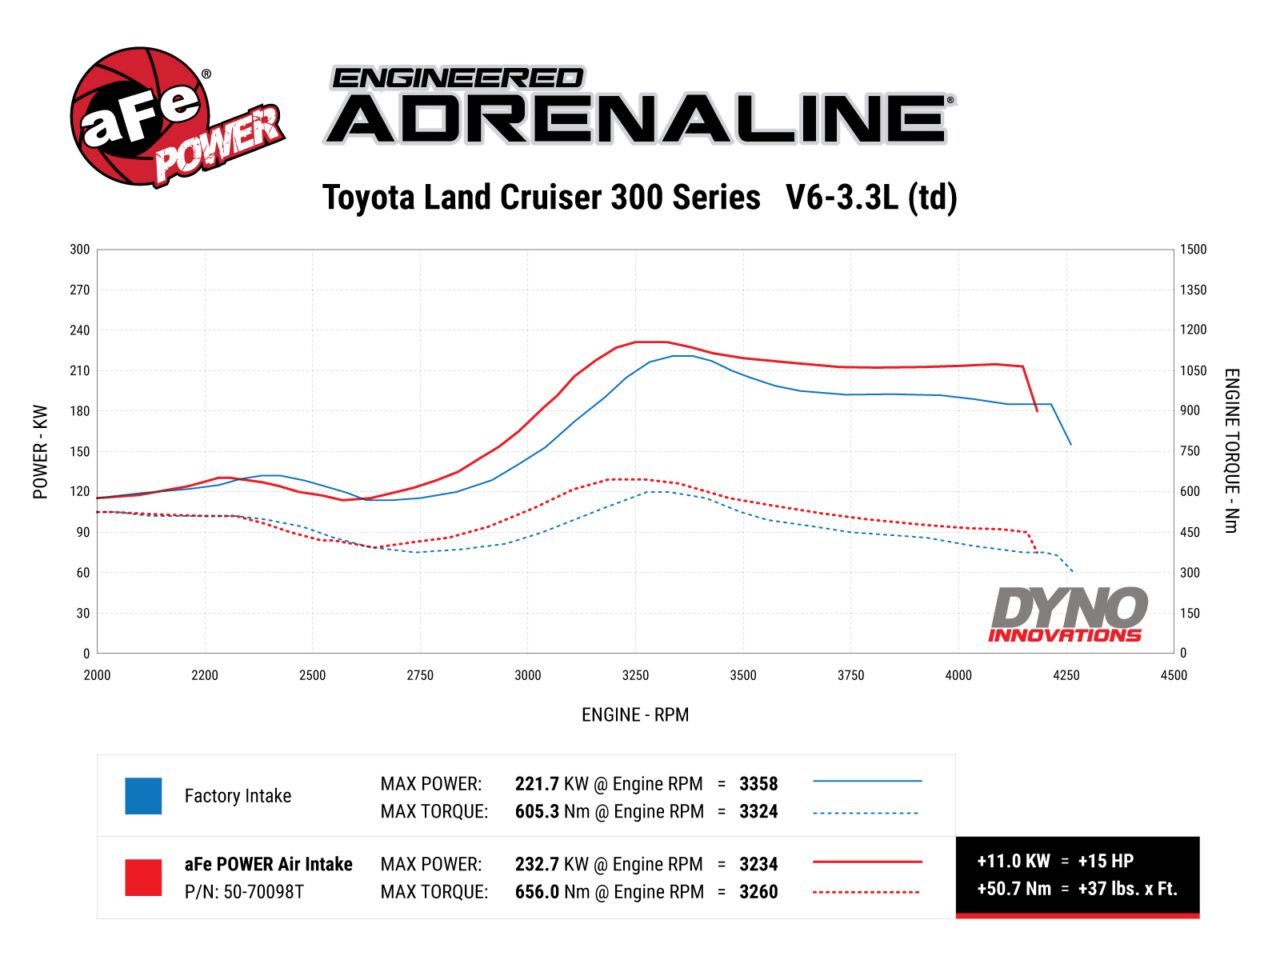 Dyno-chart test results of horsepower and torque gain numbers for J300 Toyota Landcruiser with aftermarket aFe intake